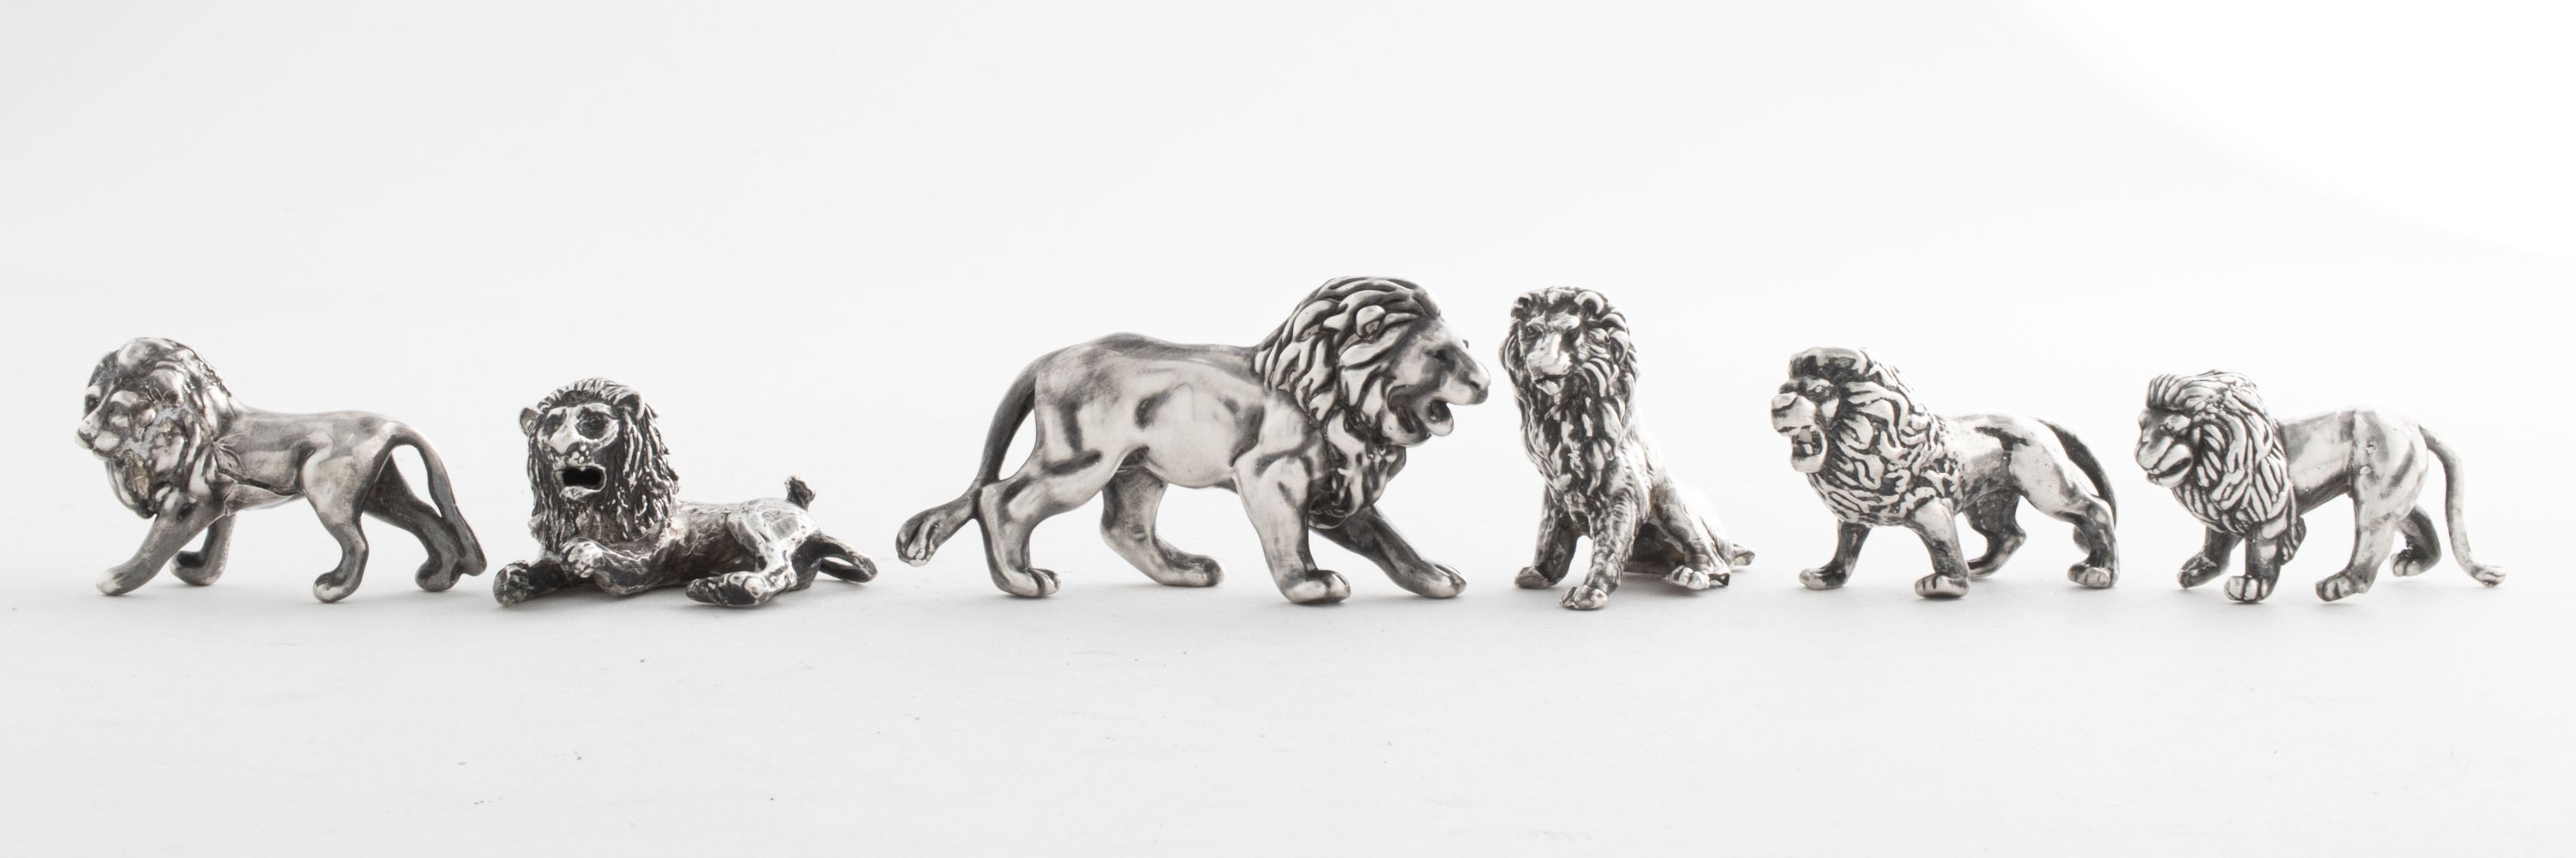 STERLING SILVER LION FIGURINES  3c5742